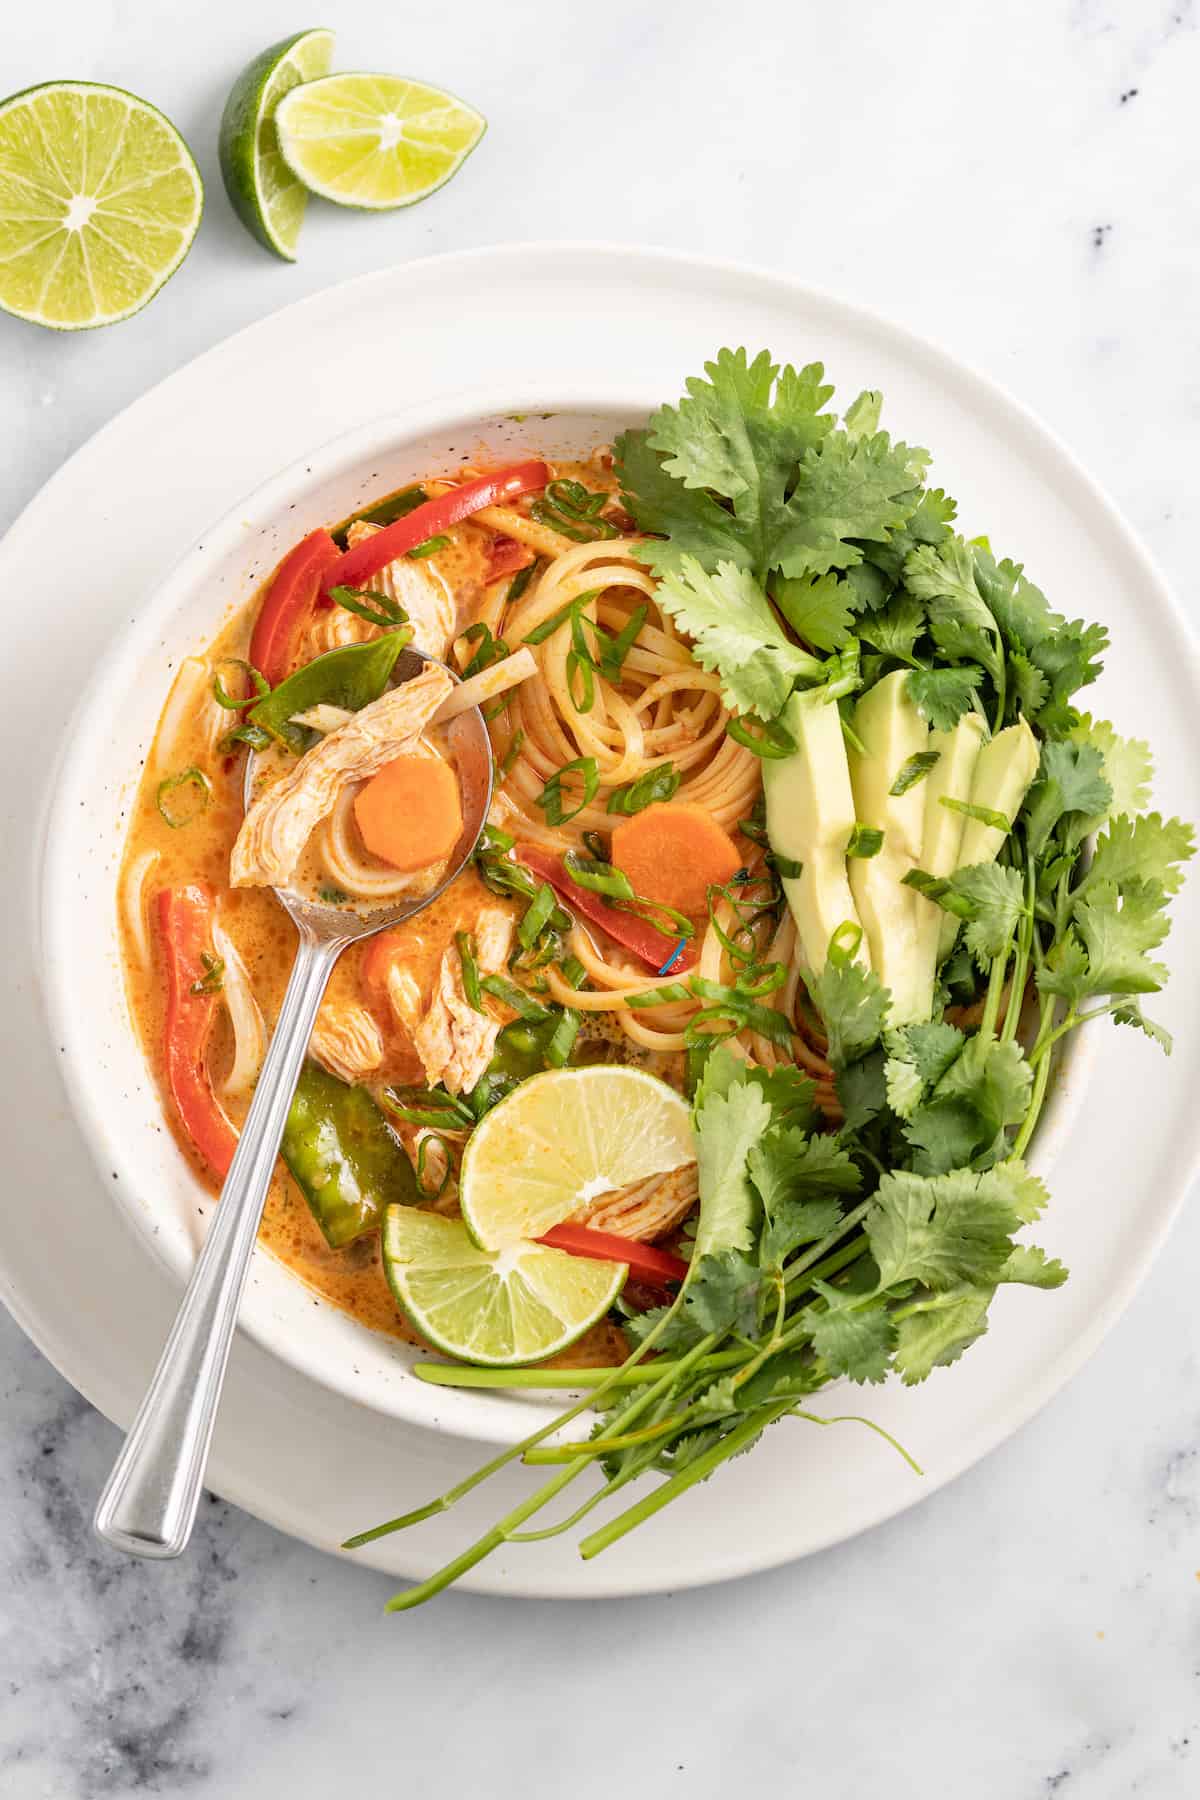 thai chicken noodle soup with an orange colored broth, rice noodles, avocados, and fresh herbs